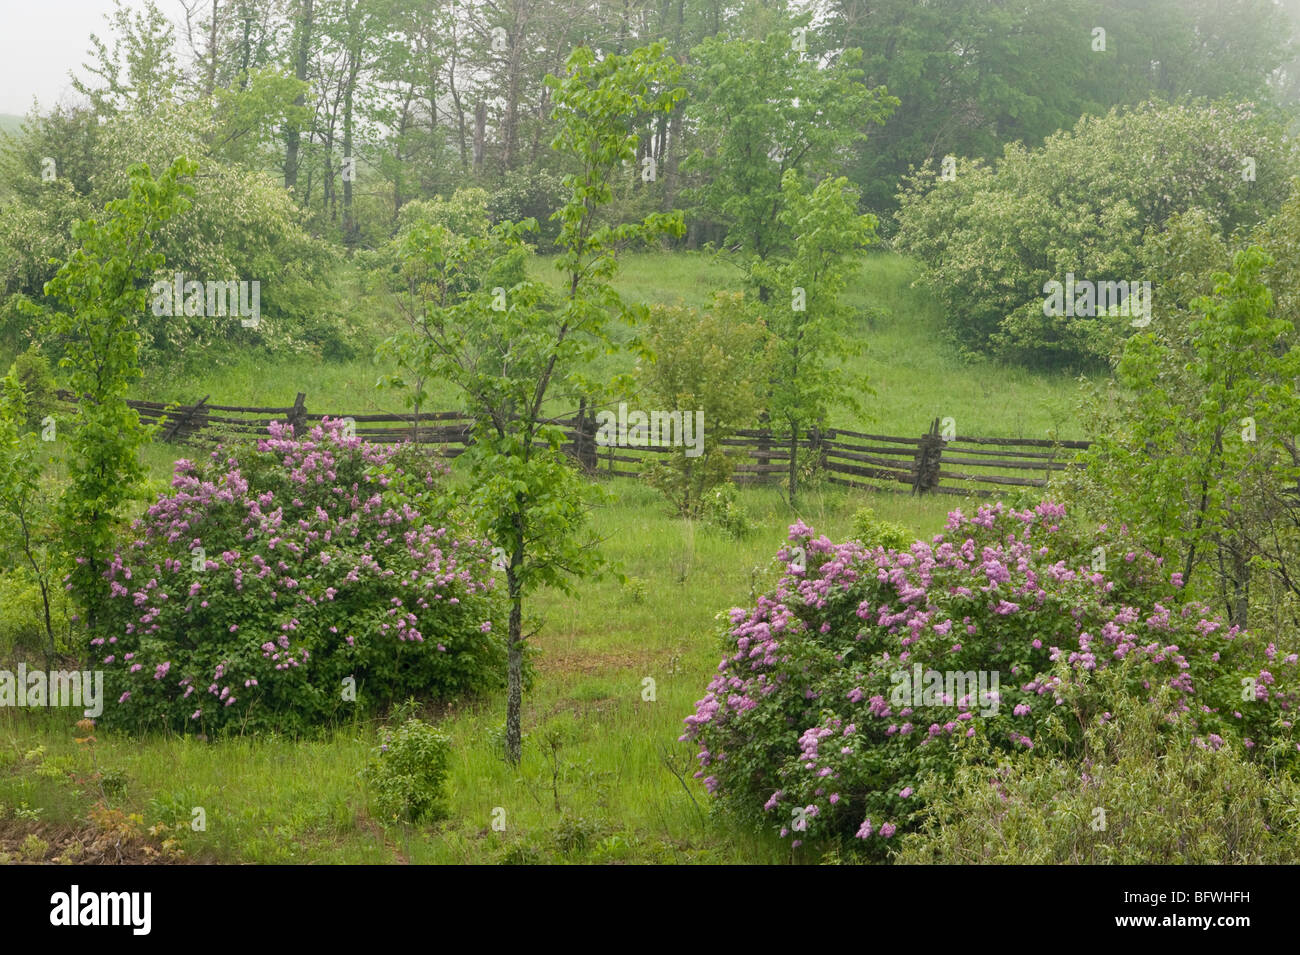 Lilac shrubs in bloom, near Little Current, Manitoulin Island, Ontario, Canada Stock Photo